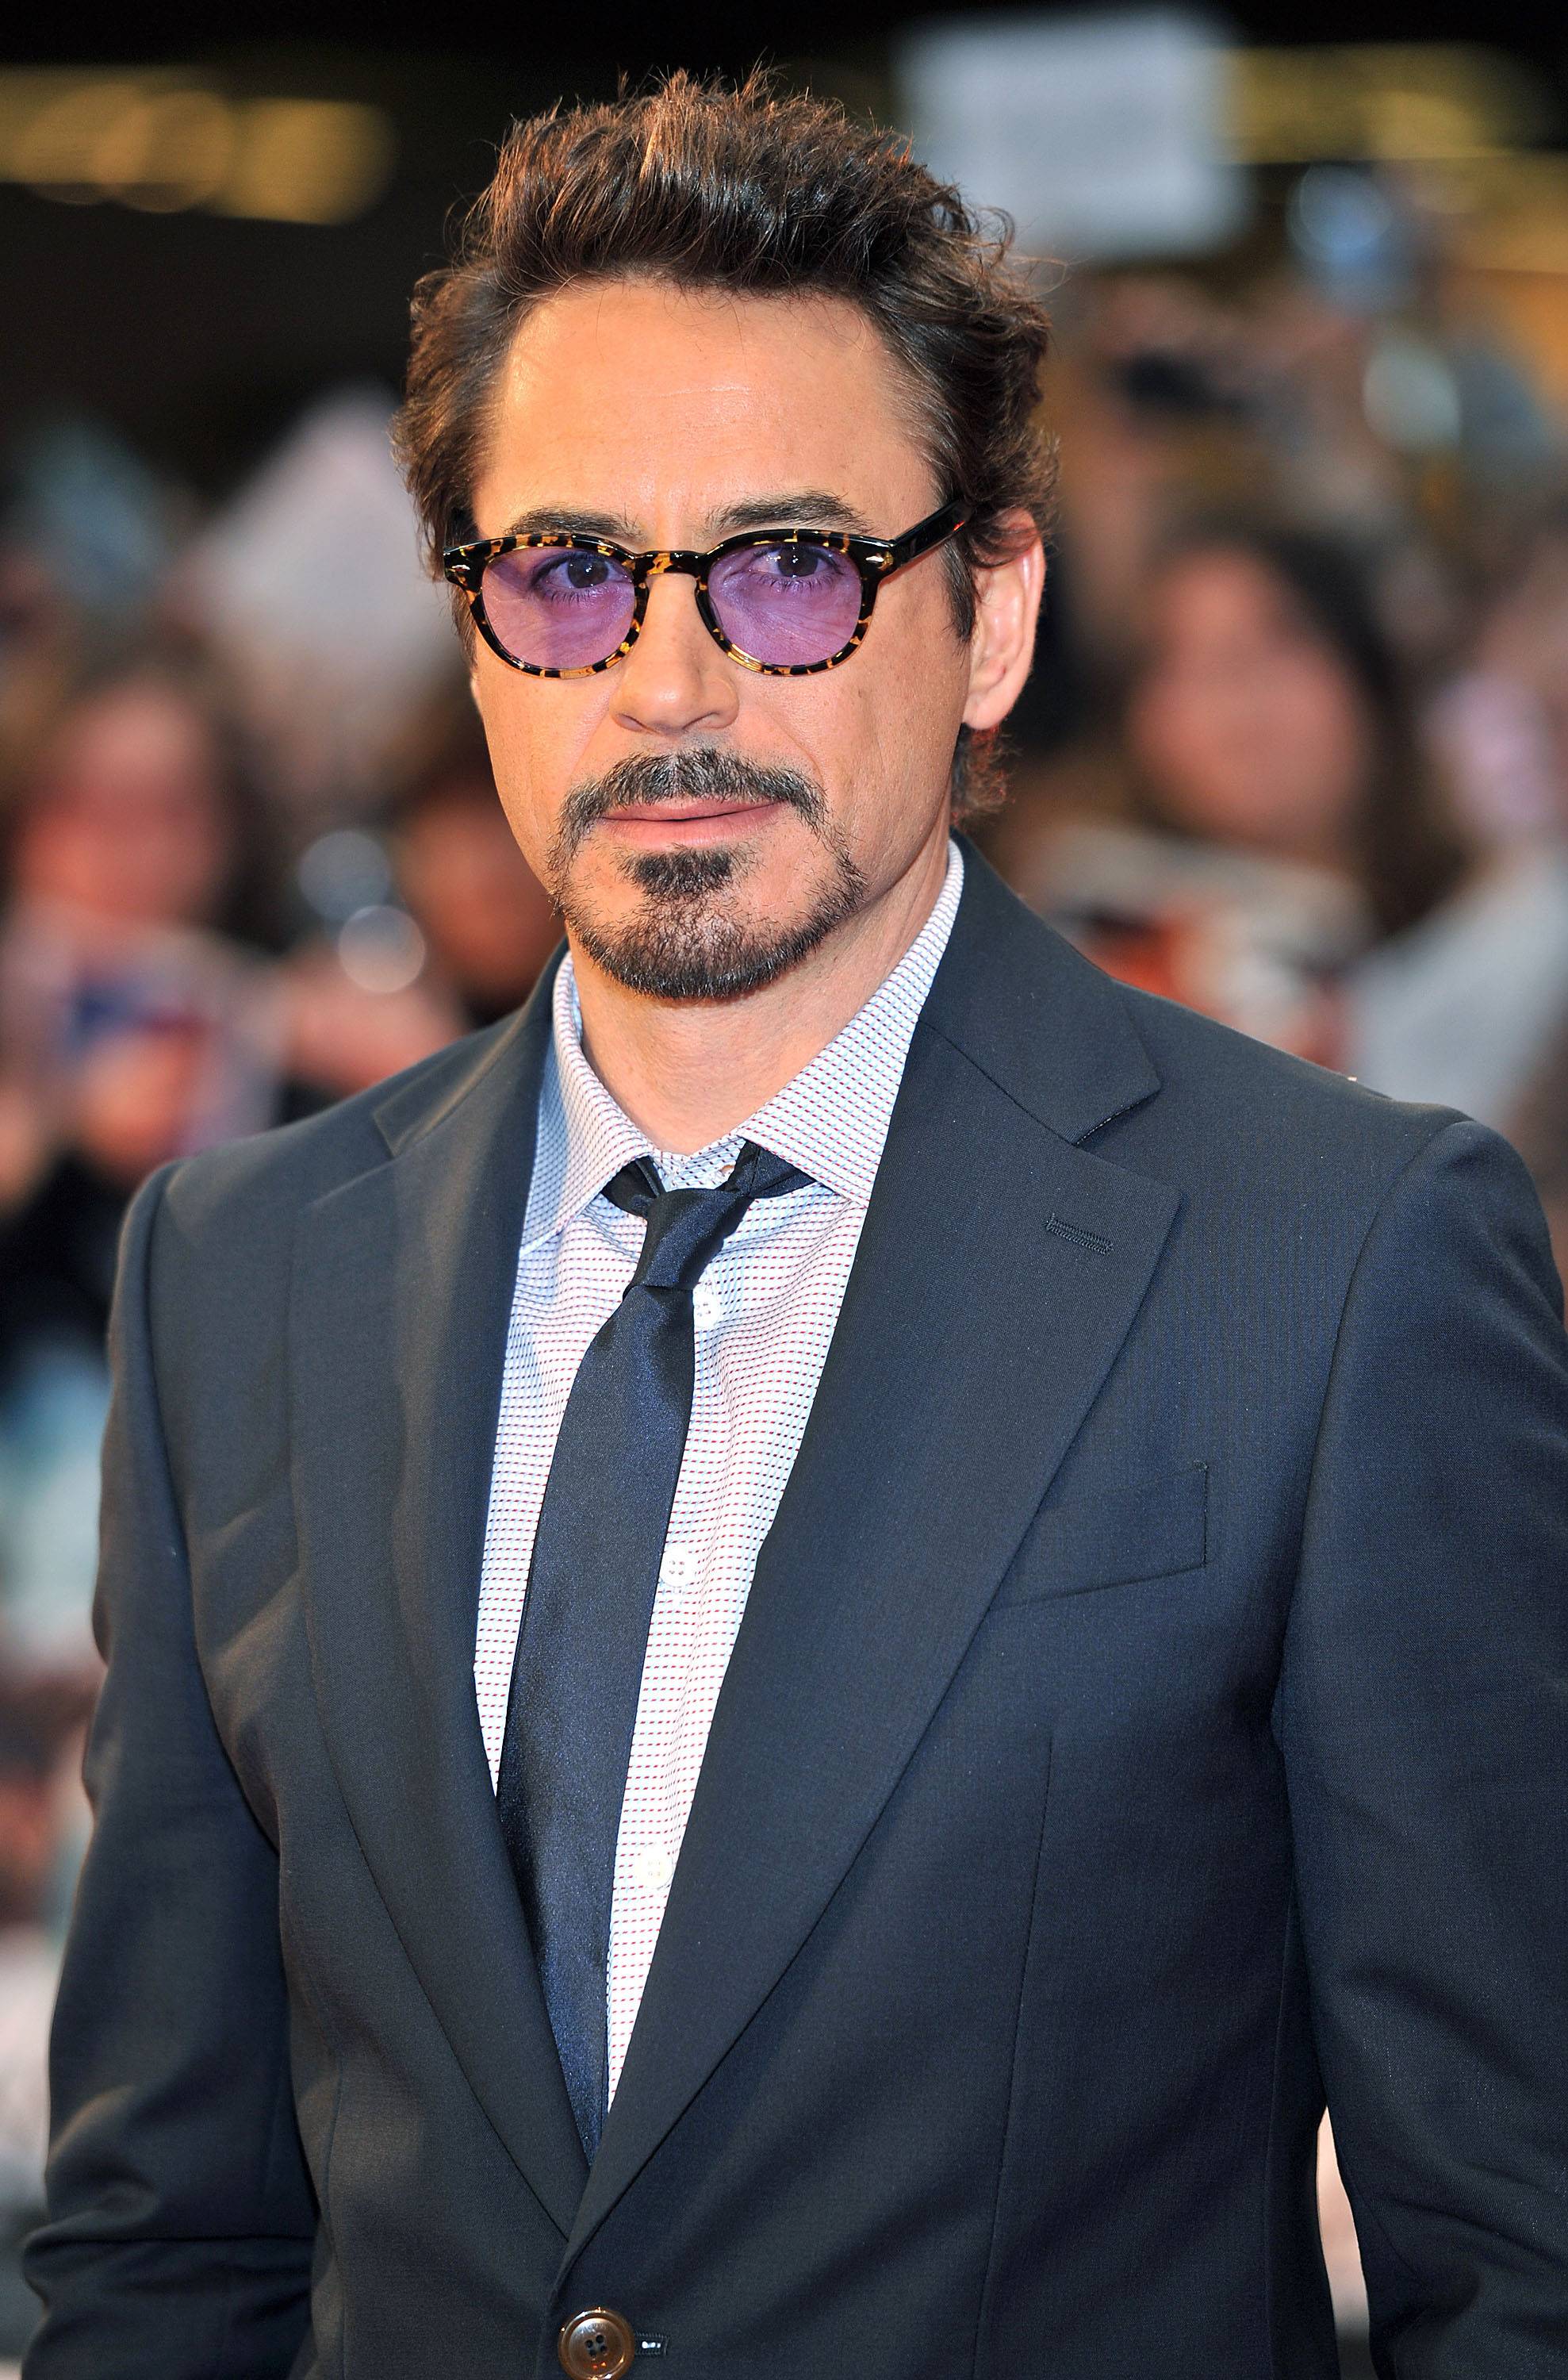 High Quality Robert Downey Jr Pictures 4 - HD Wallpapers N